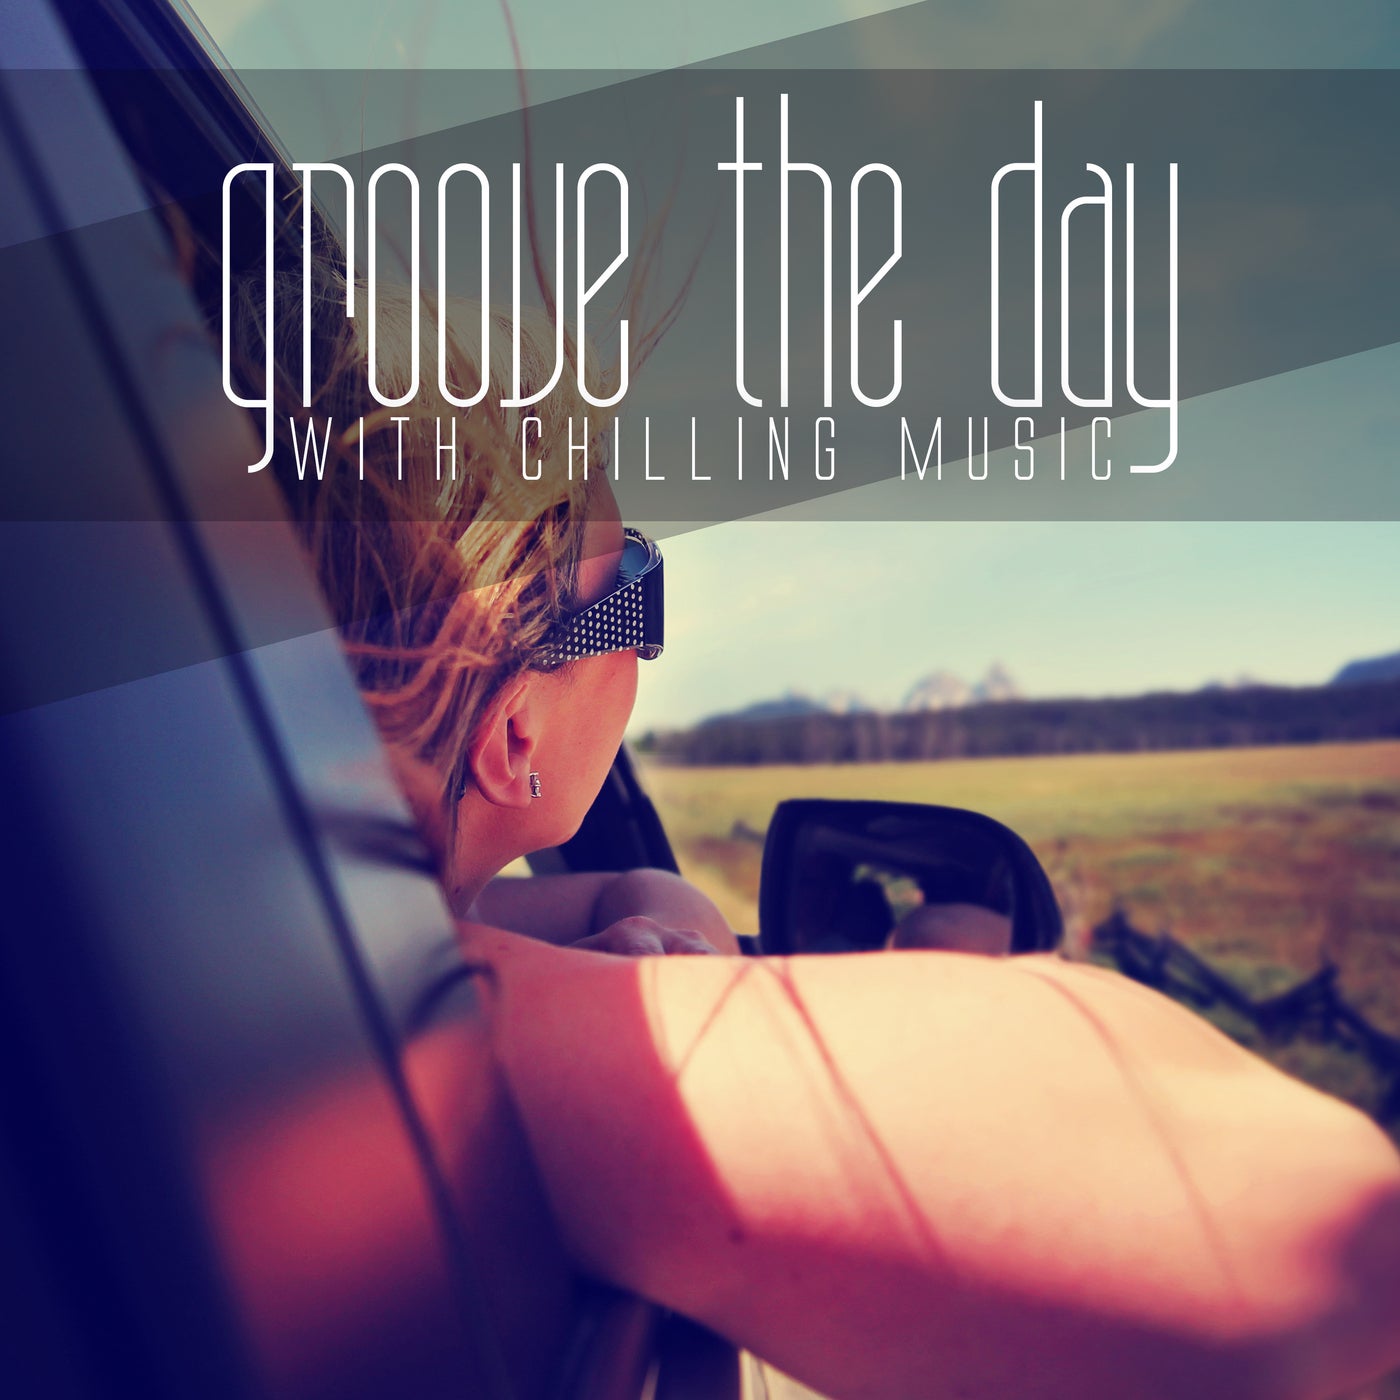 Groove the Day with Chilling Music